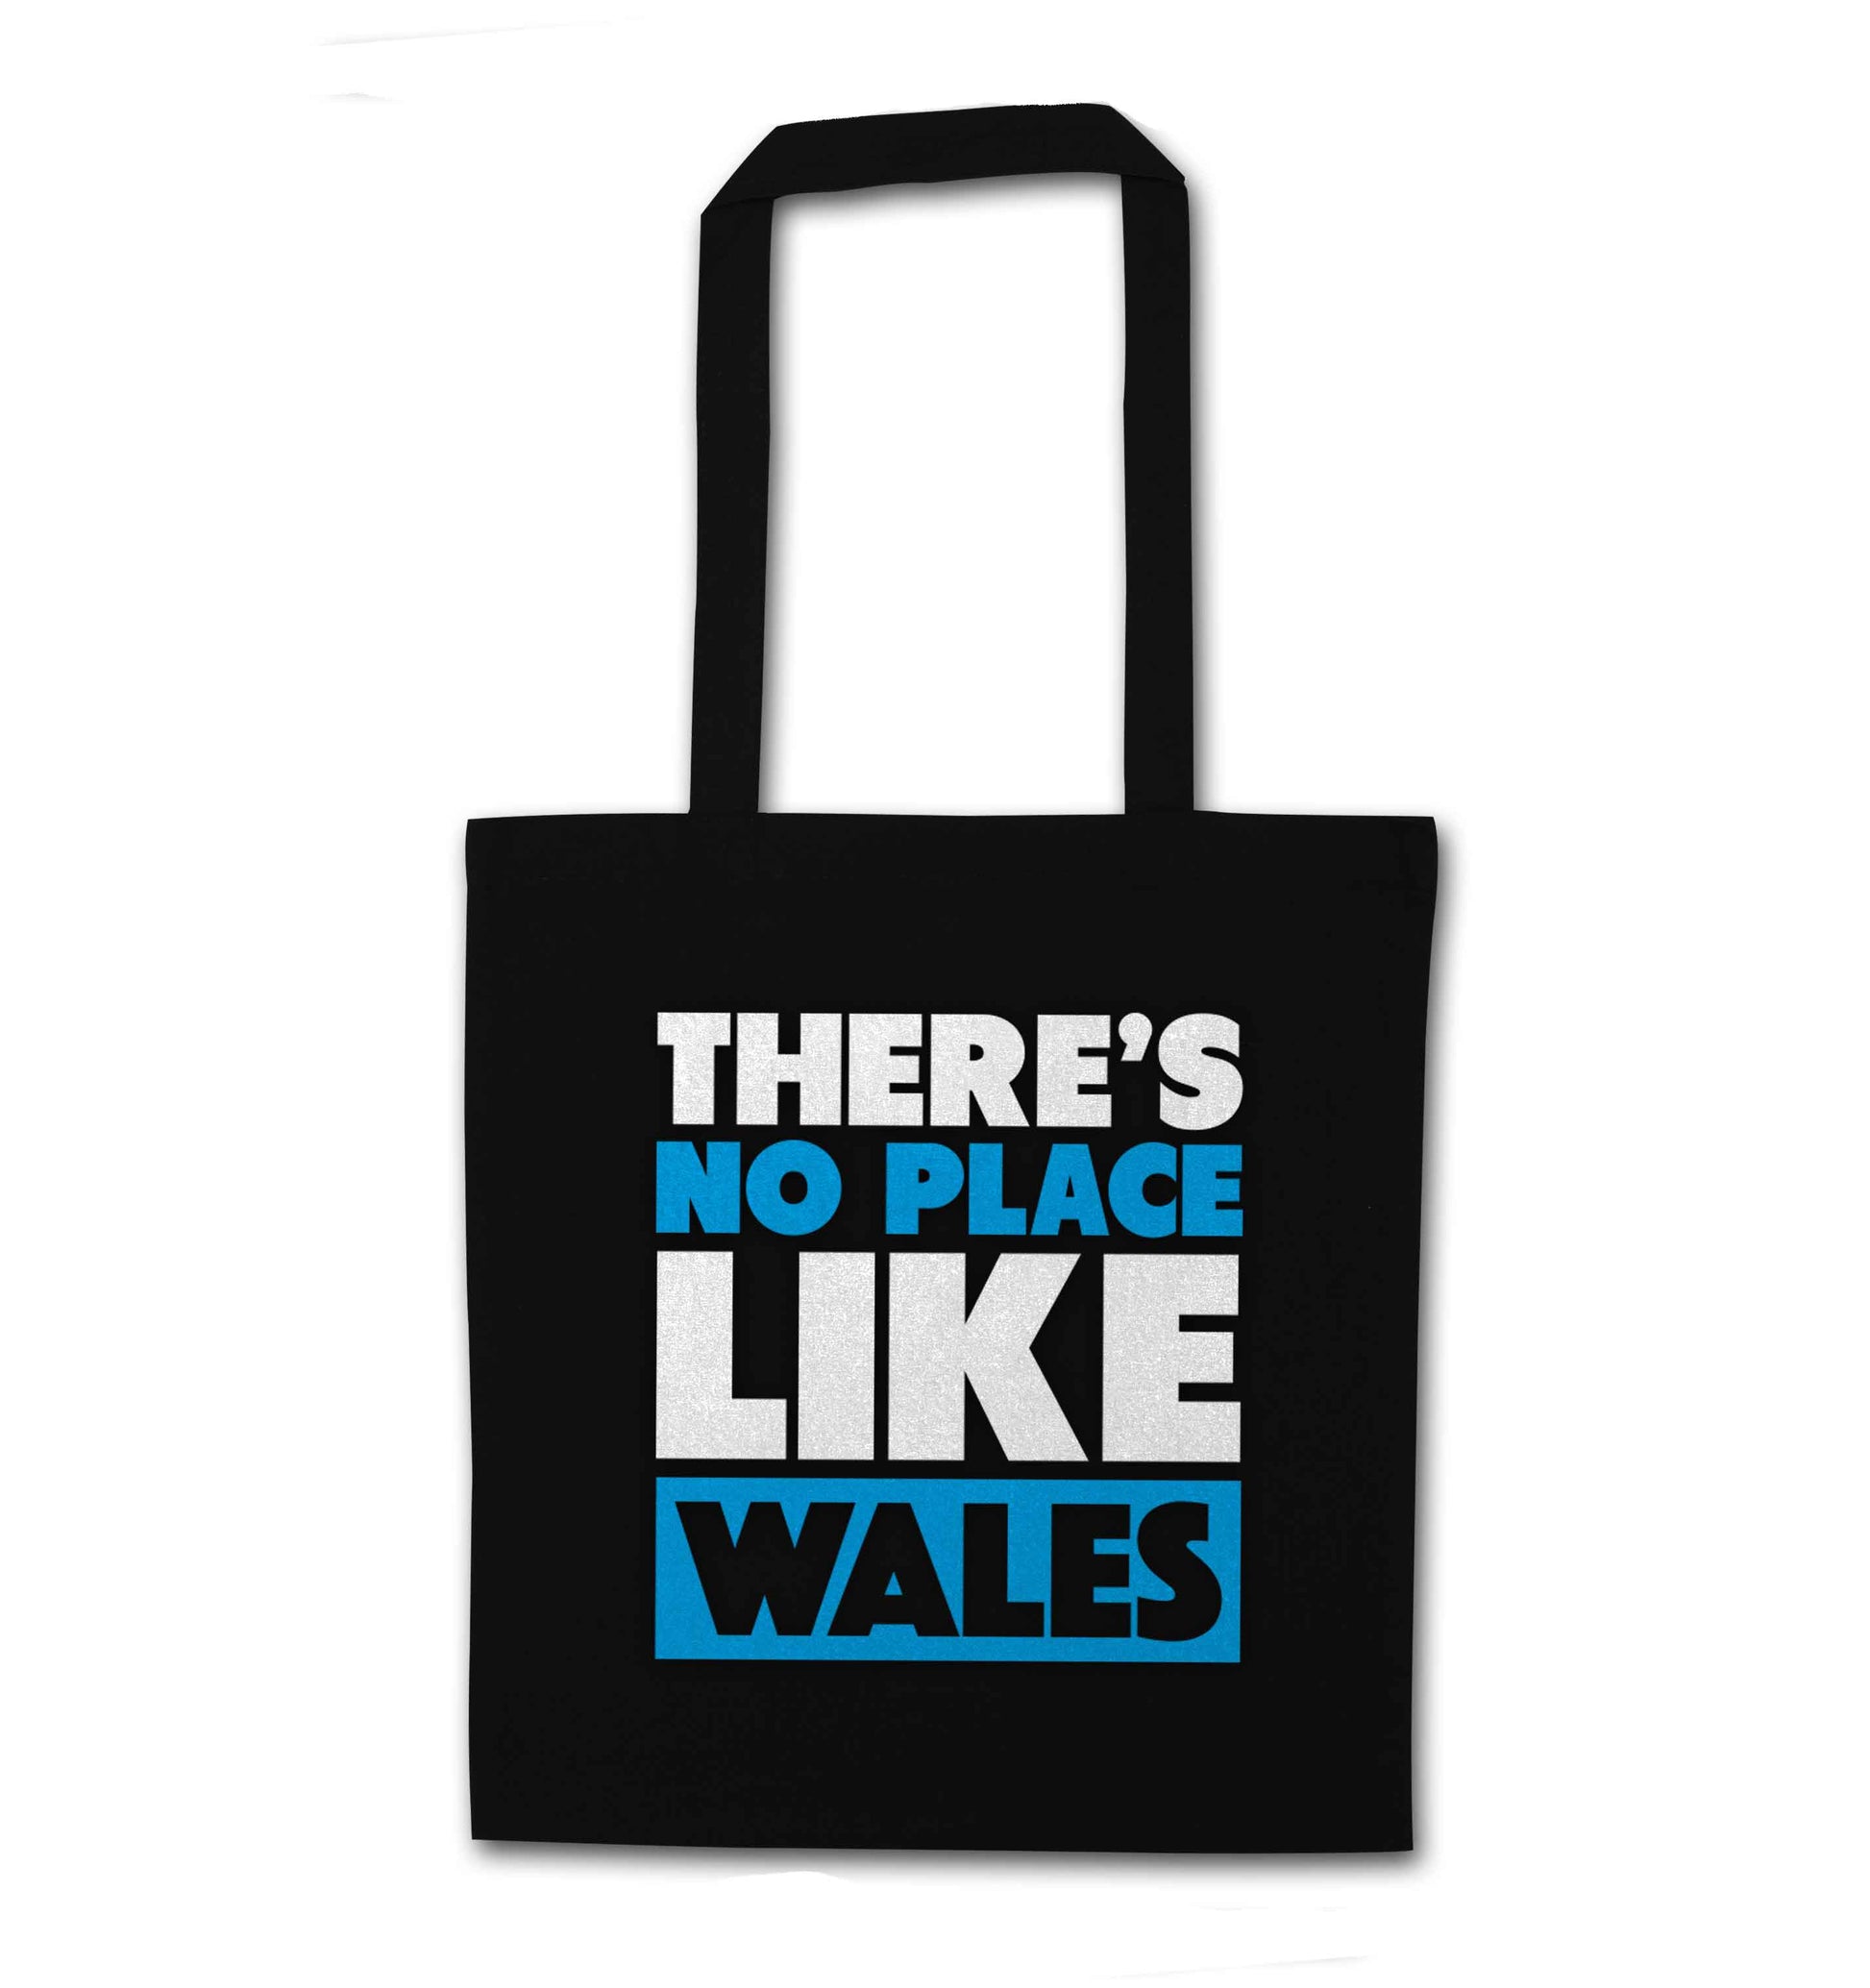 There's no place like Wales black tote bag